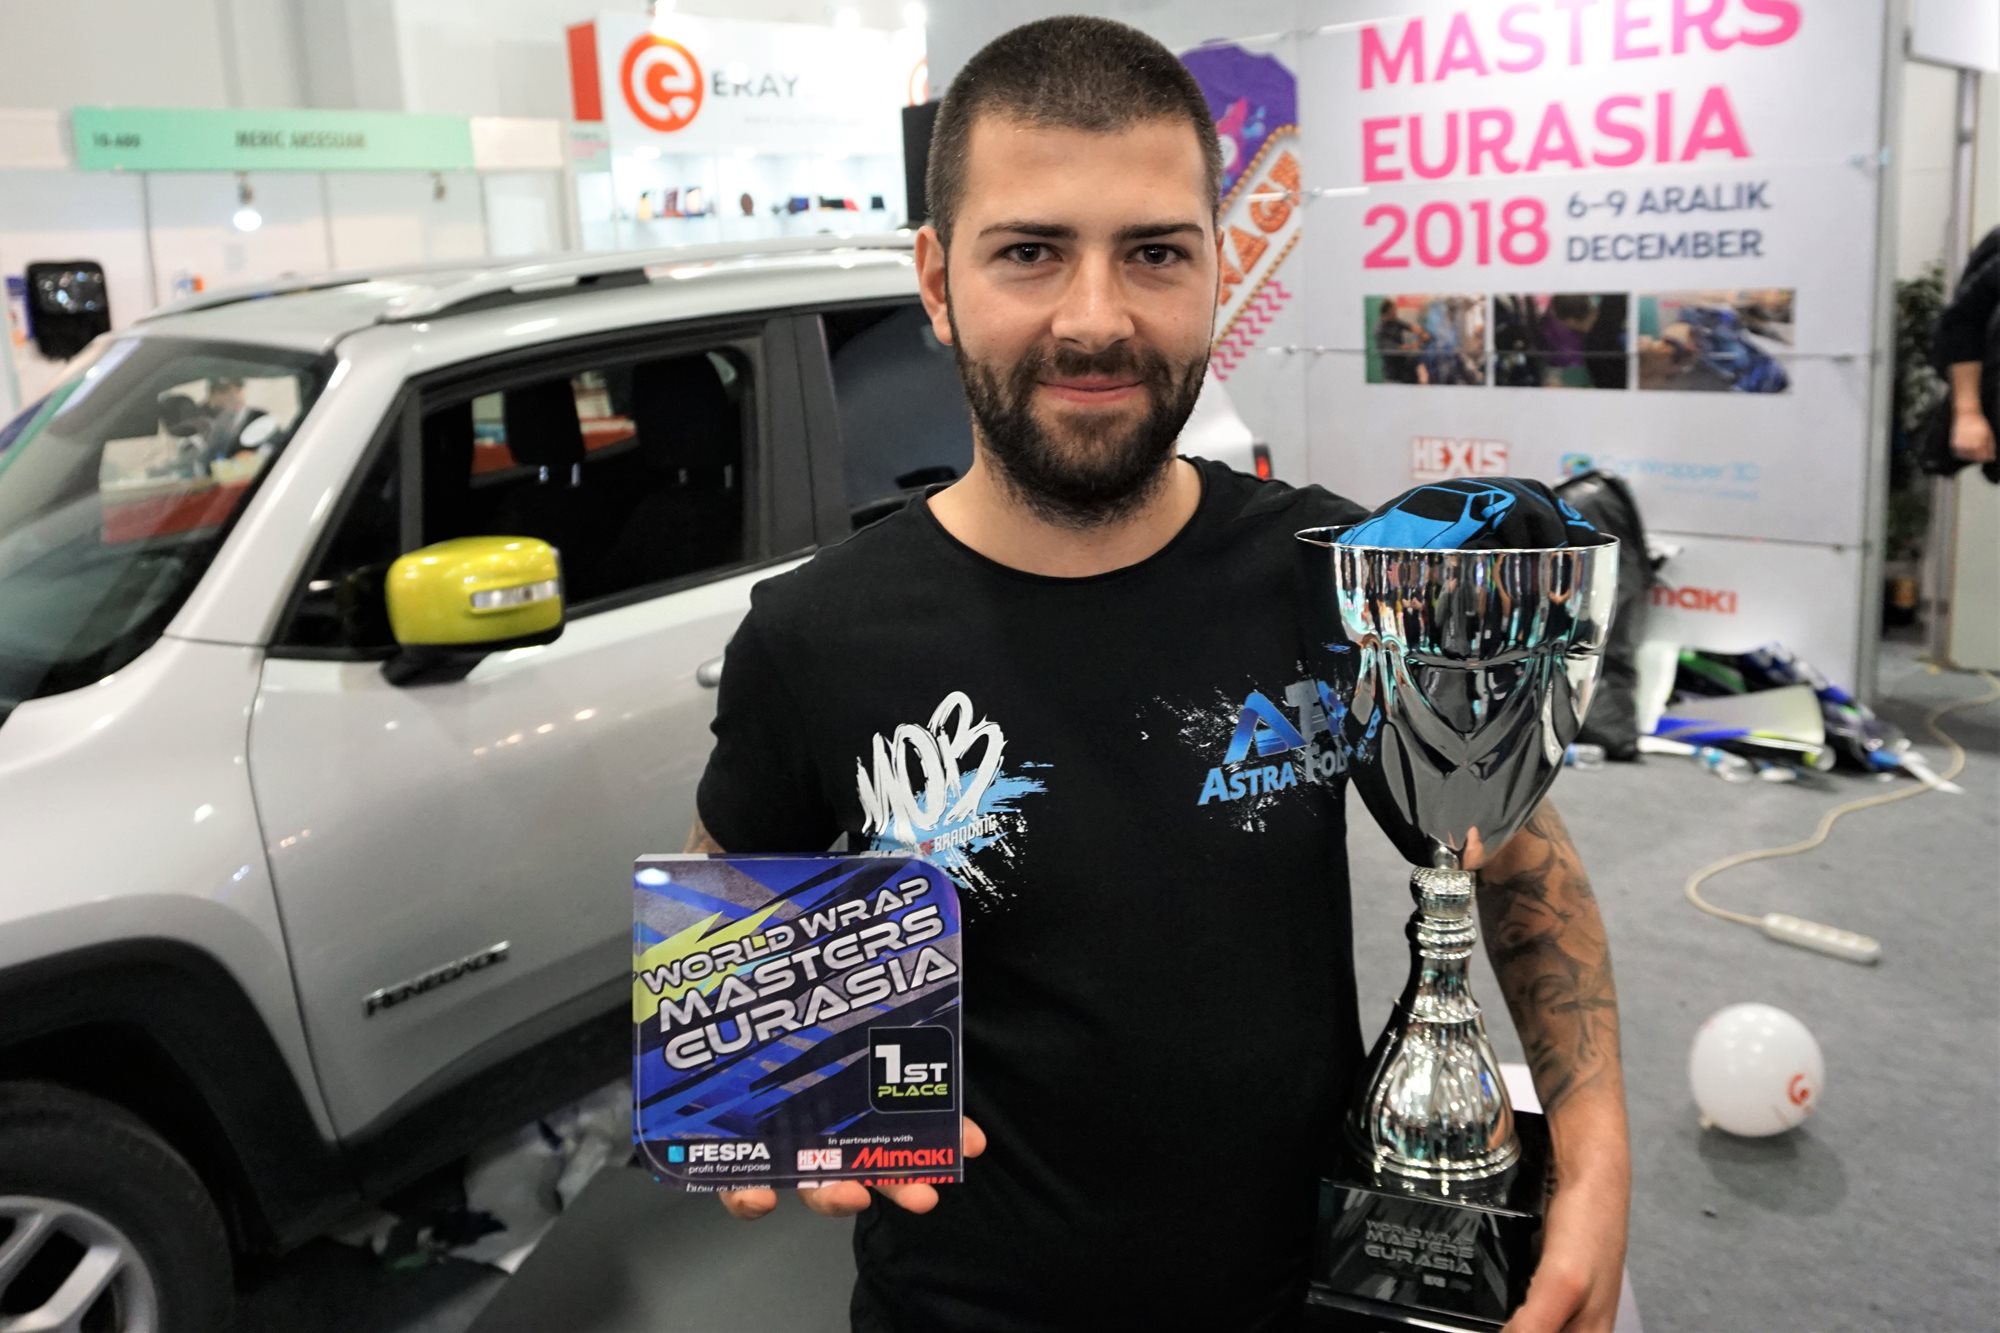 Alligevel tage ned Optø, optø, frost tø The reigning World Wrap Masters Champion, Ivan Tenchev takes home the title  of Wrap Masters Eurasia 2018 winner.